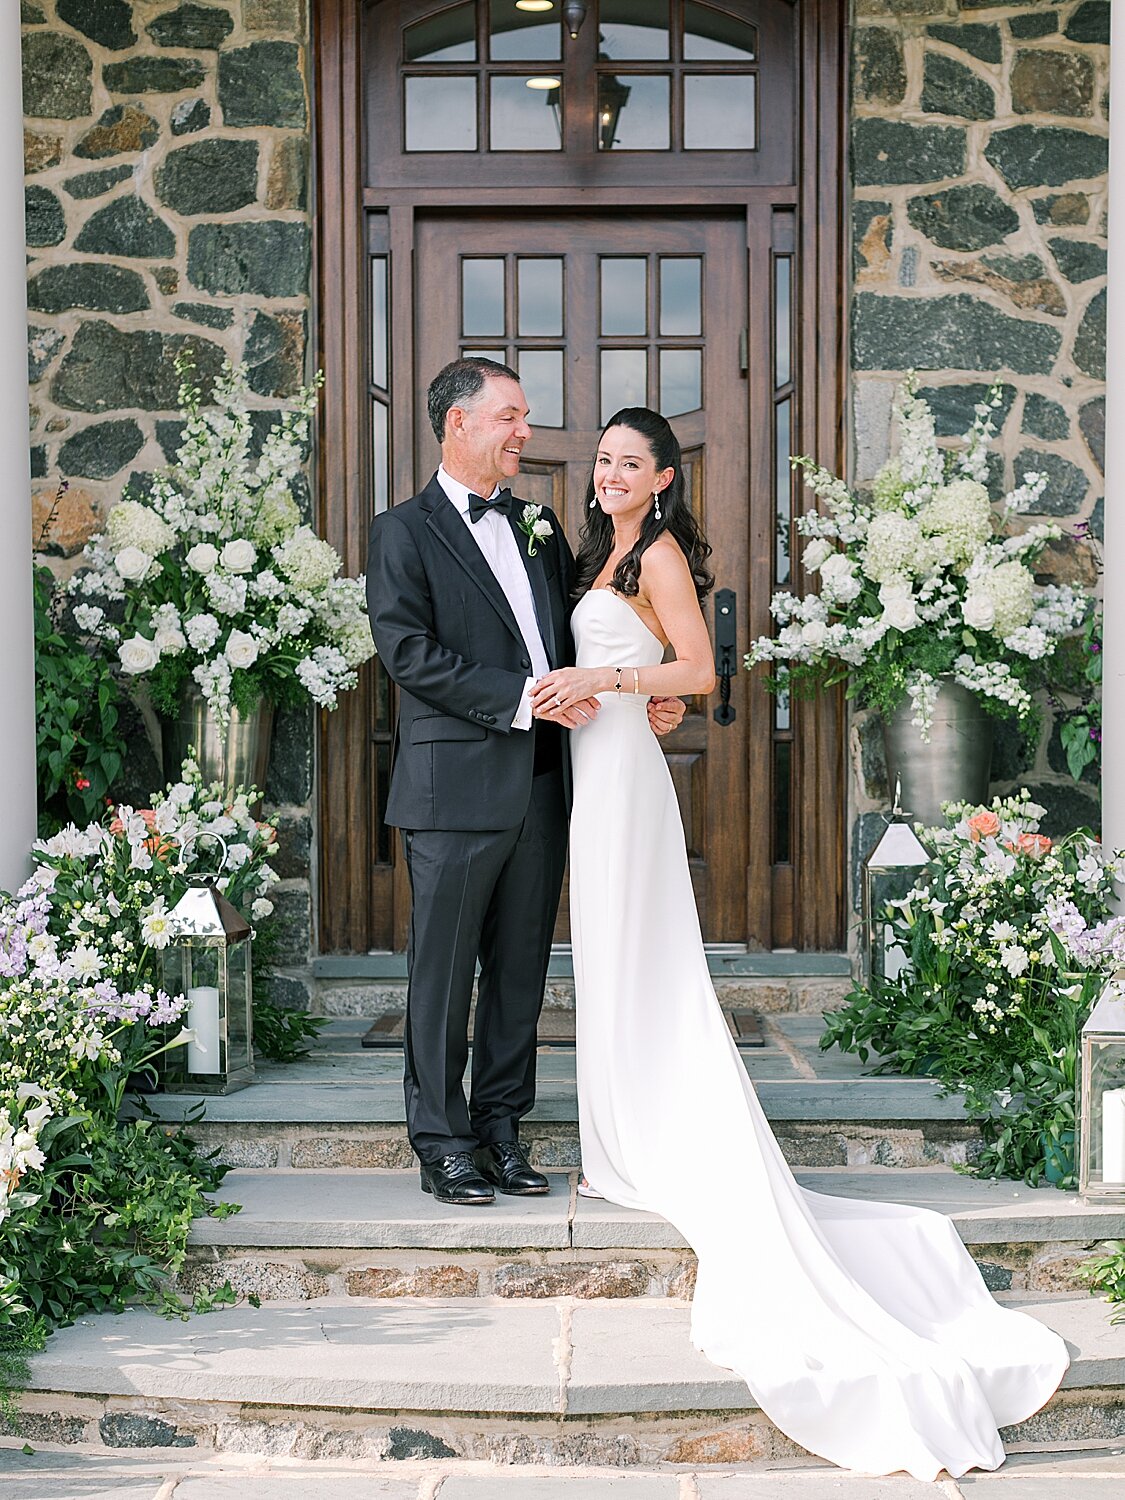 bride and dad pose on front steps on wedding day | Stylish Private Home Wedding Inspiration | Asher Gardner Photography